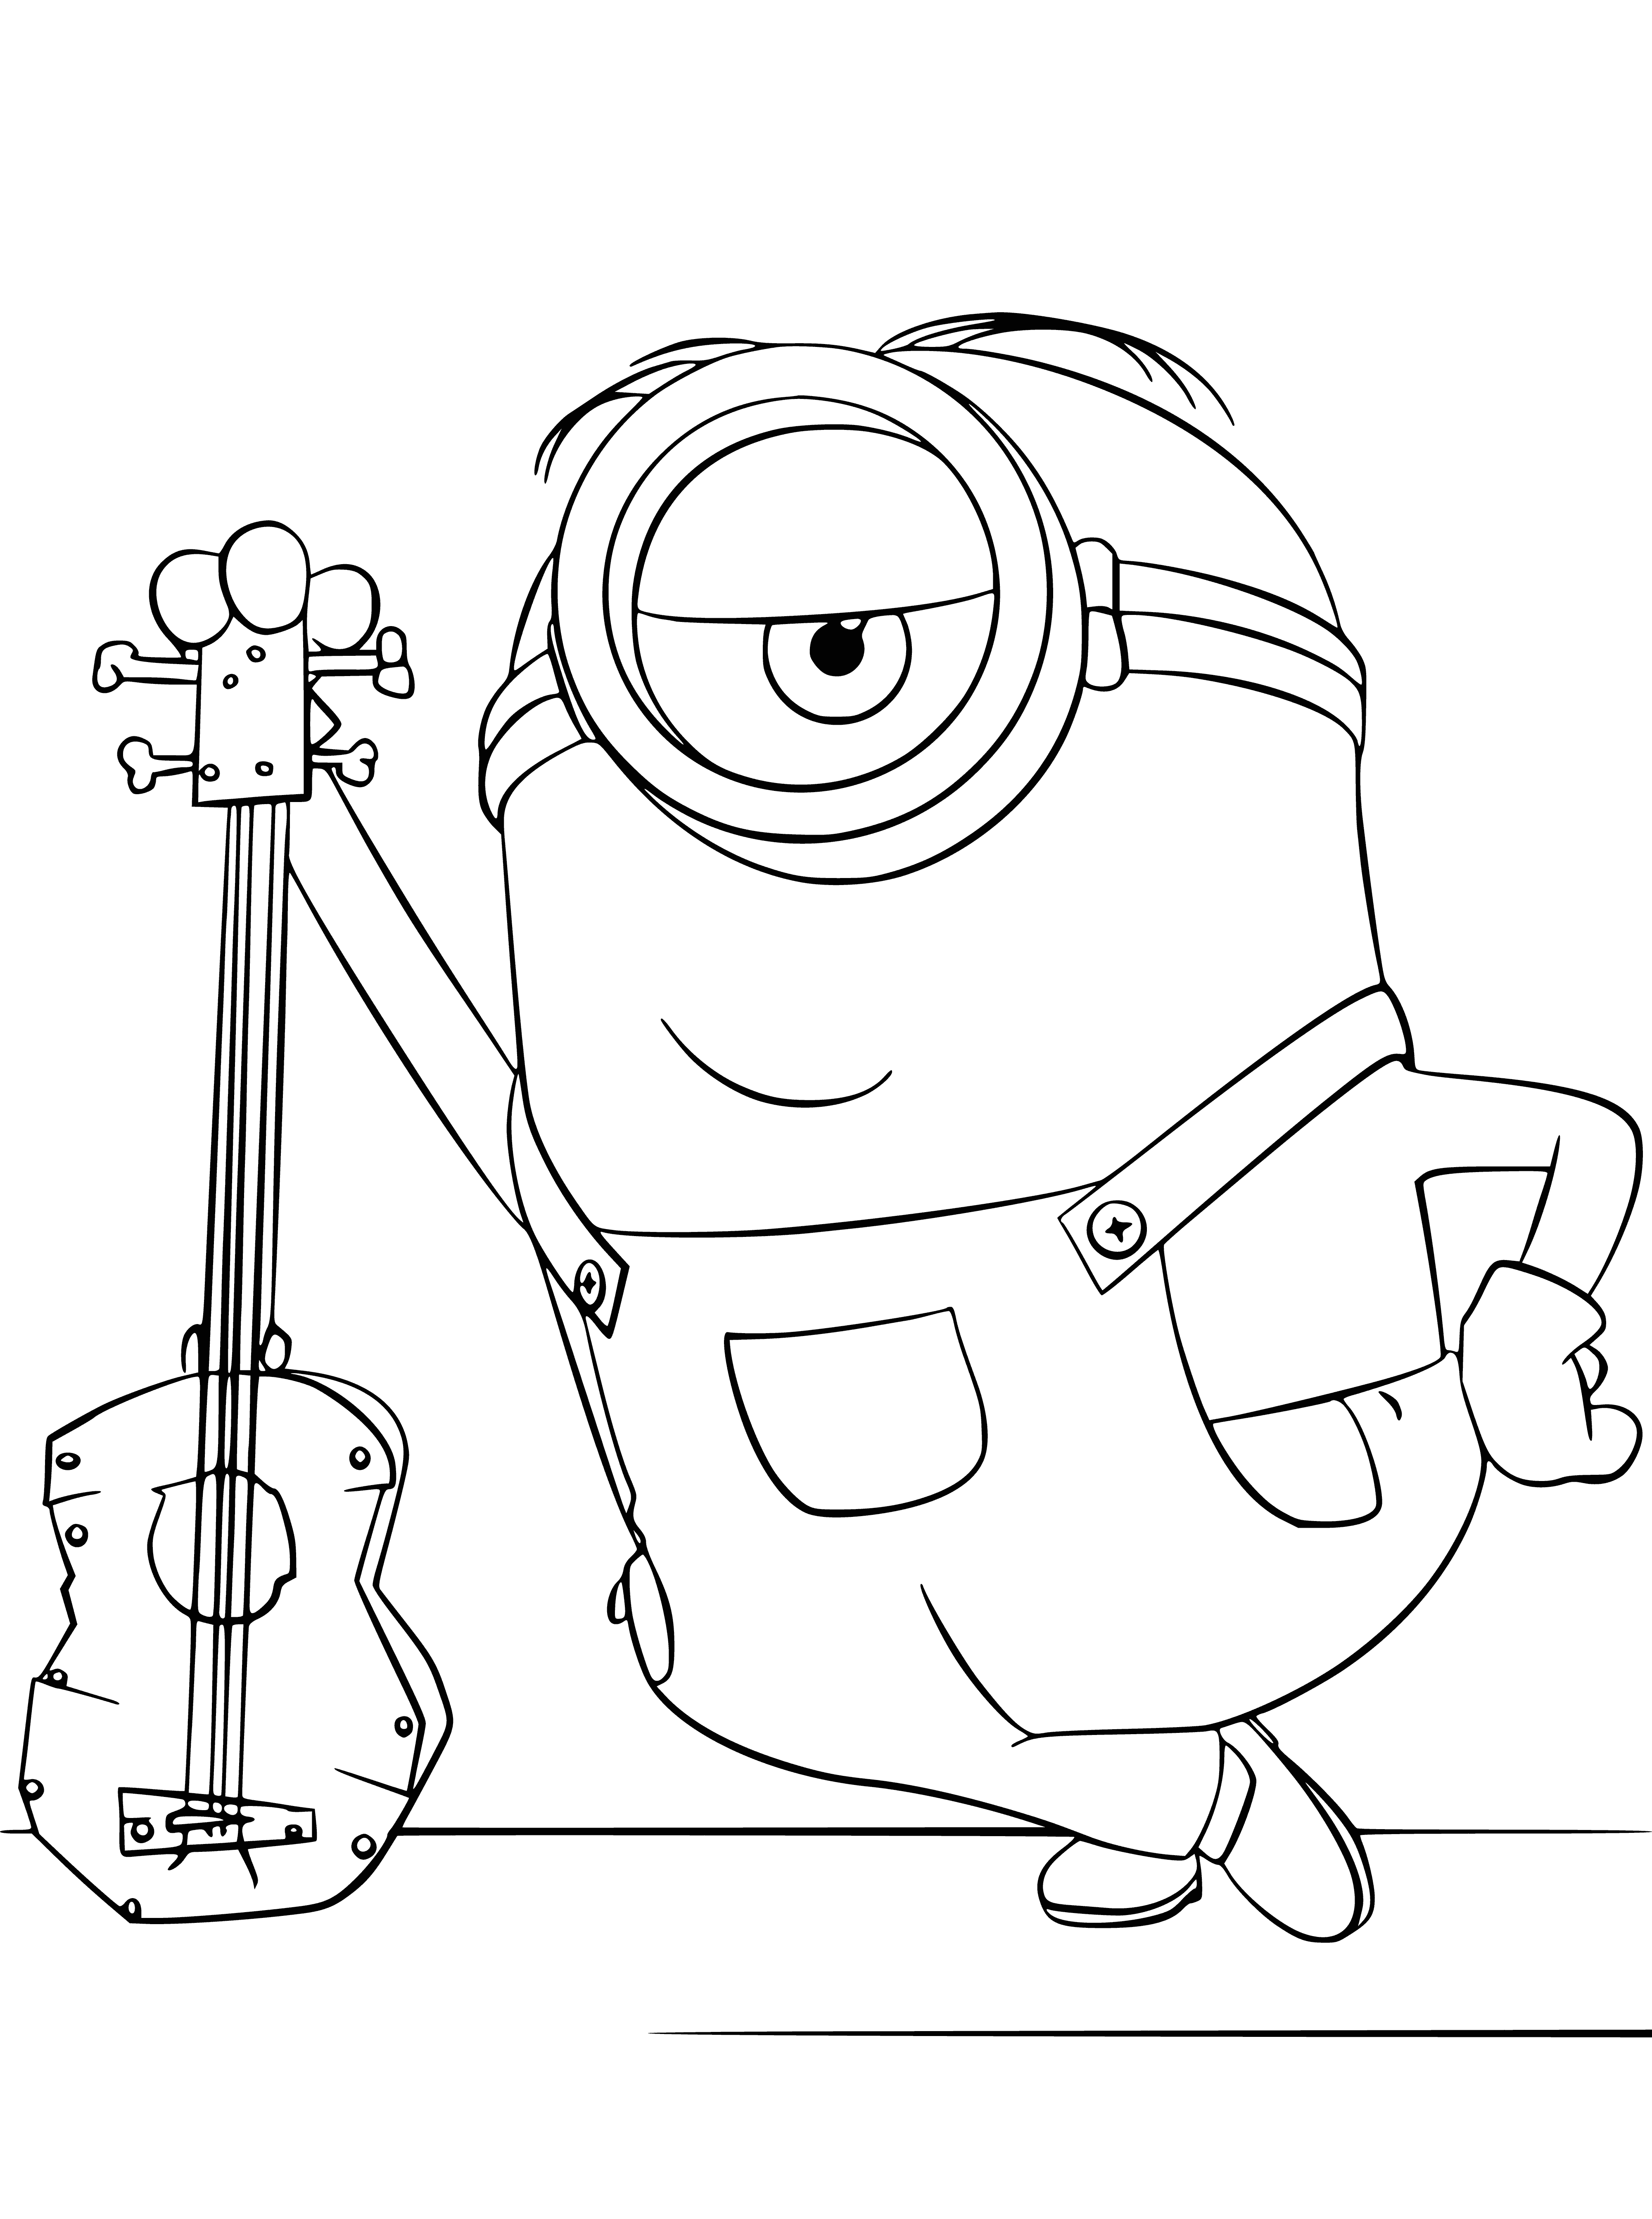 coloring page: Minions are yellow, cylindrical followers of Gru who often do his bidding. One Minion, Stewart, is playing the guitar in blue overalls & hat.